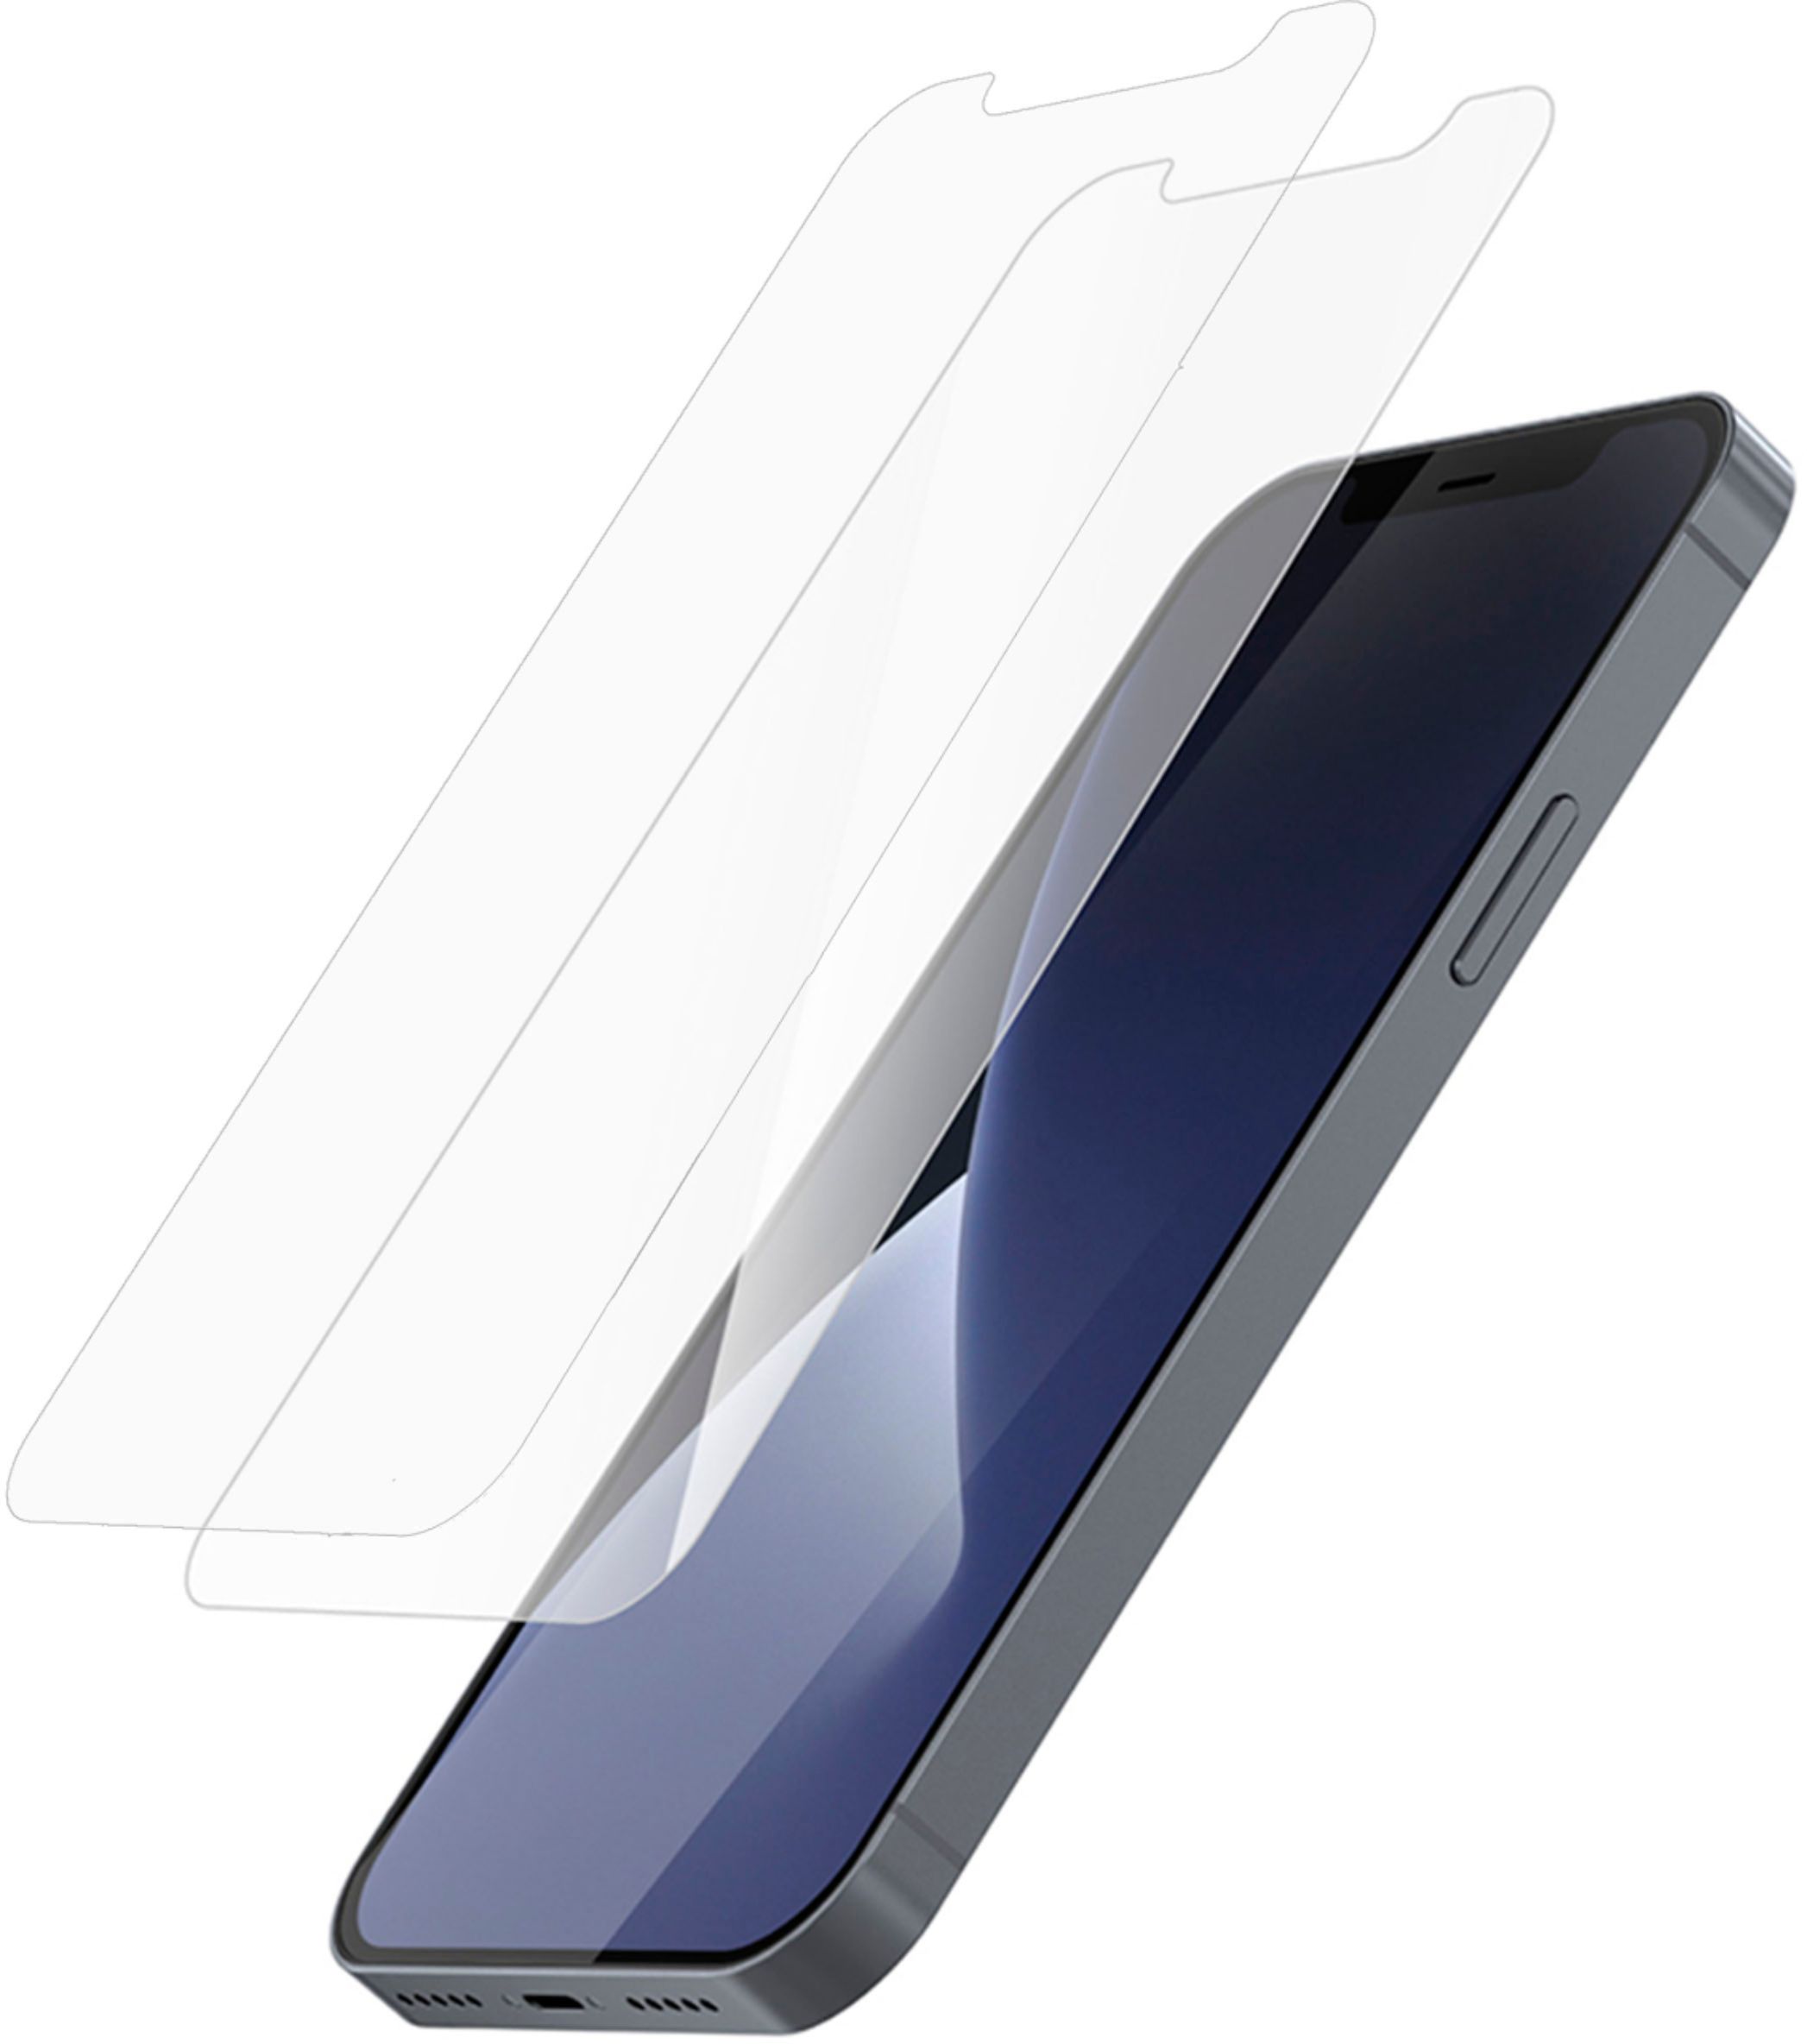 Angle View: SaharaCase - AirBoost Shield Carrying Case for Apple iPhone 12 mini - Transparent Black